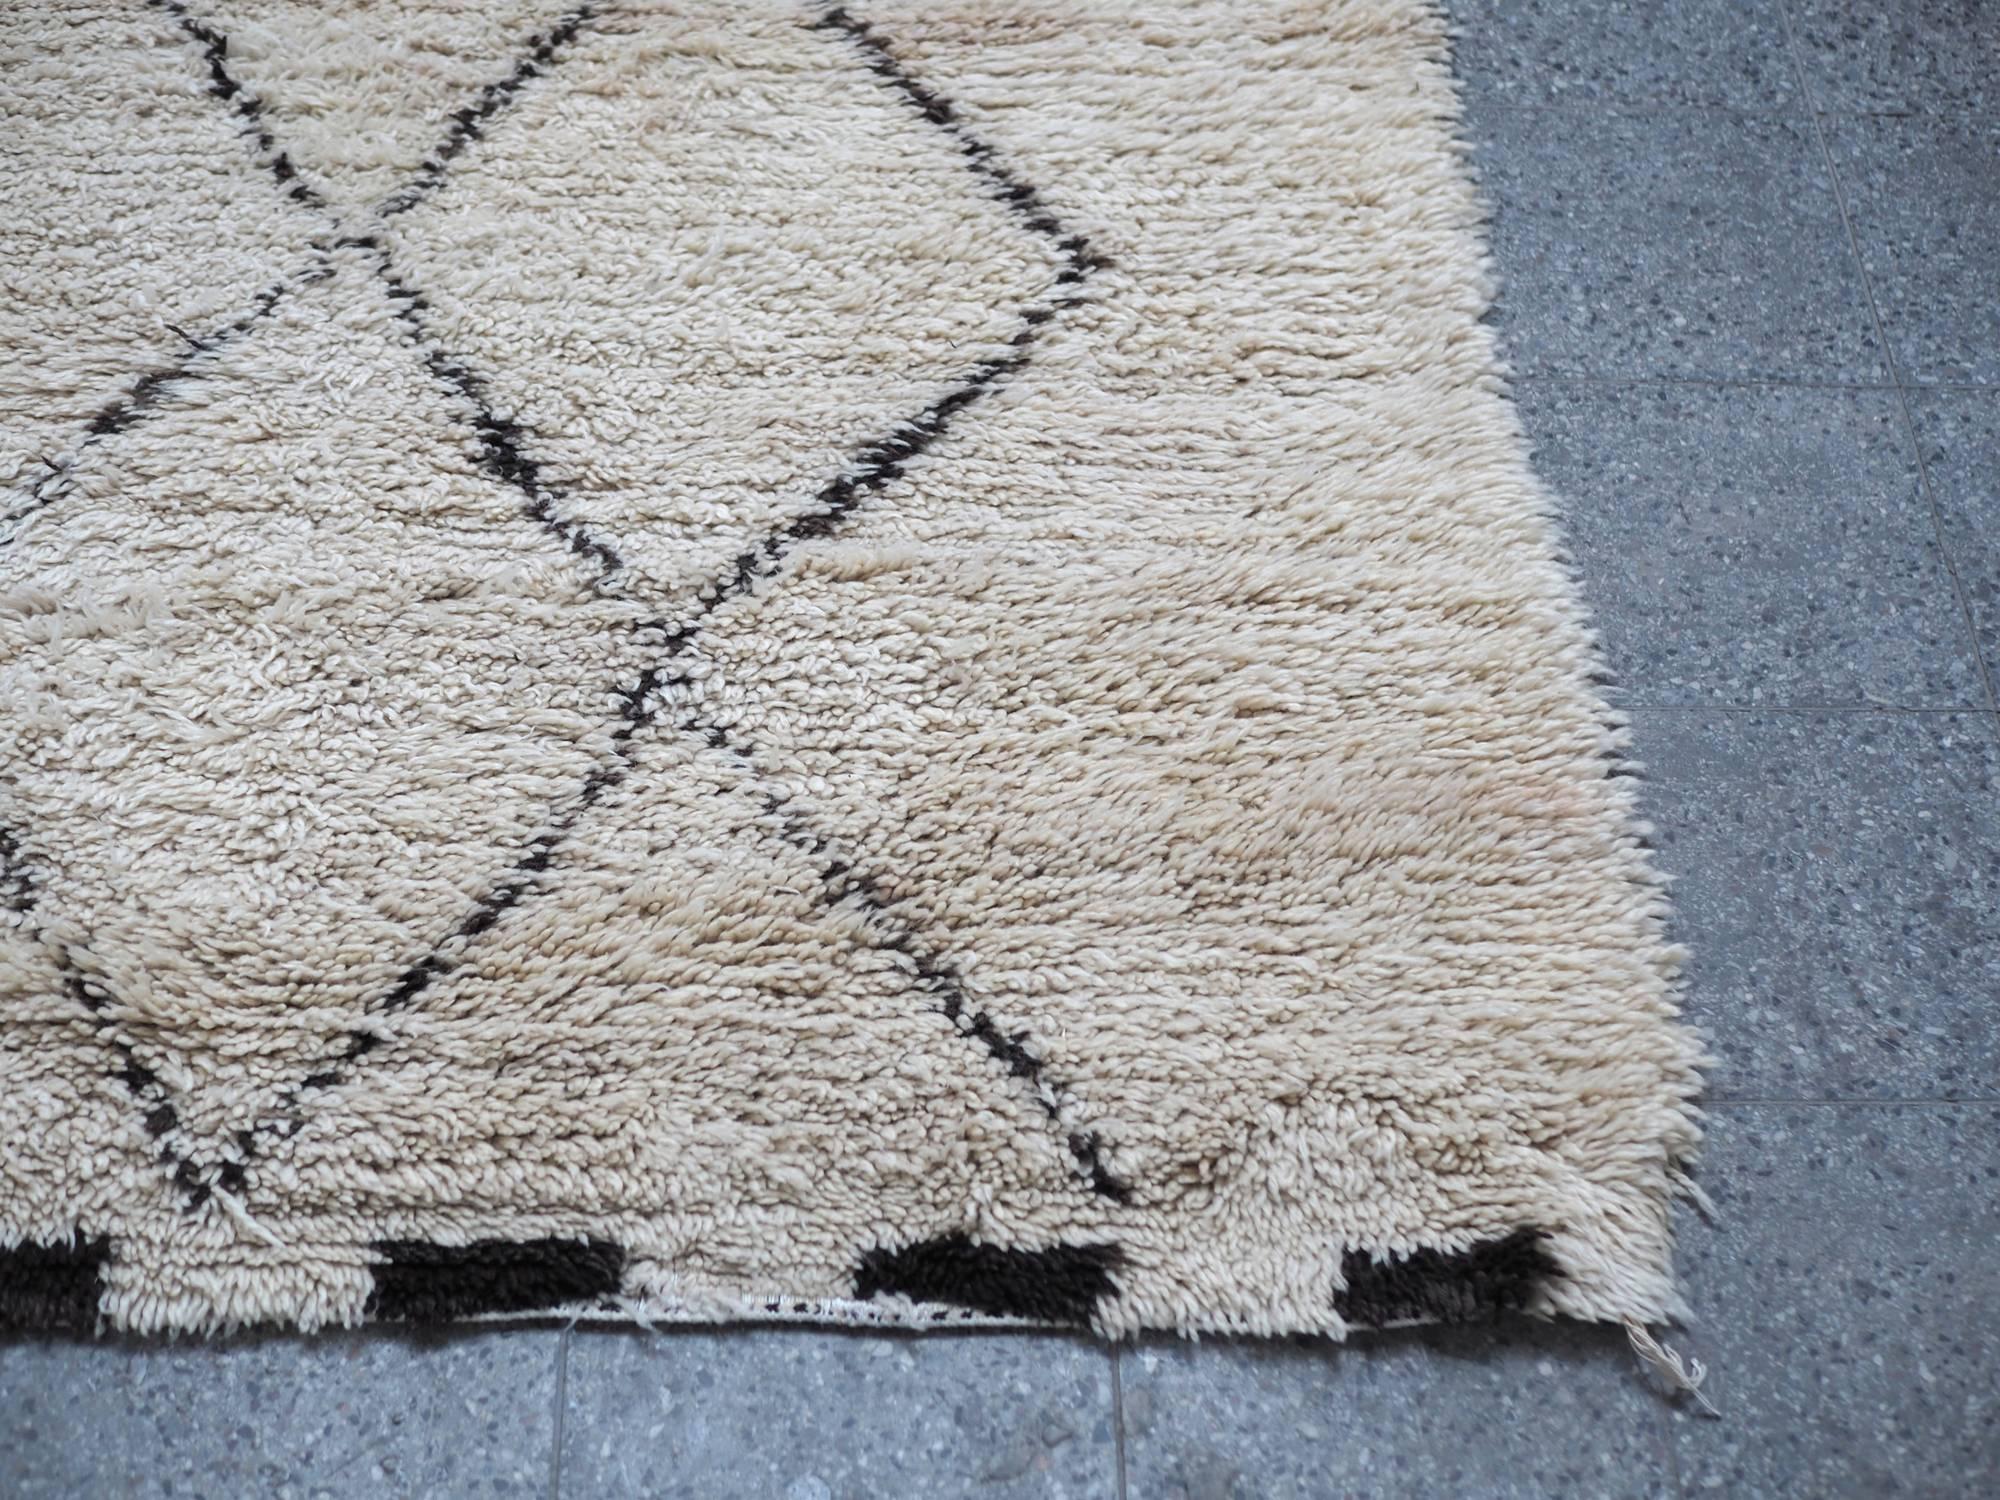 Hand-Woven Vintage Beni Ourain Moroccan Rug with Three Column Diamond Pattern